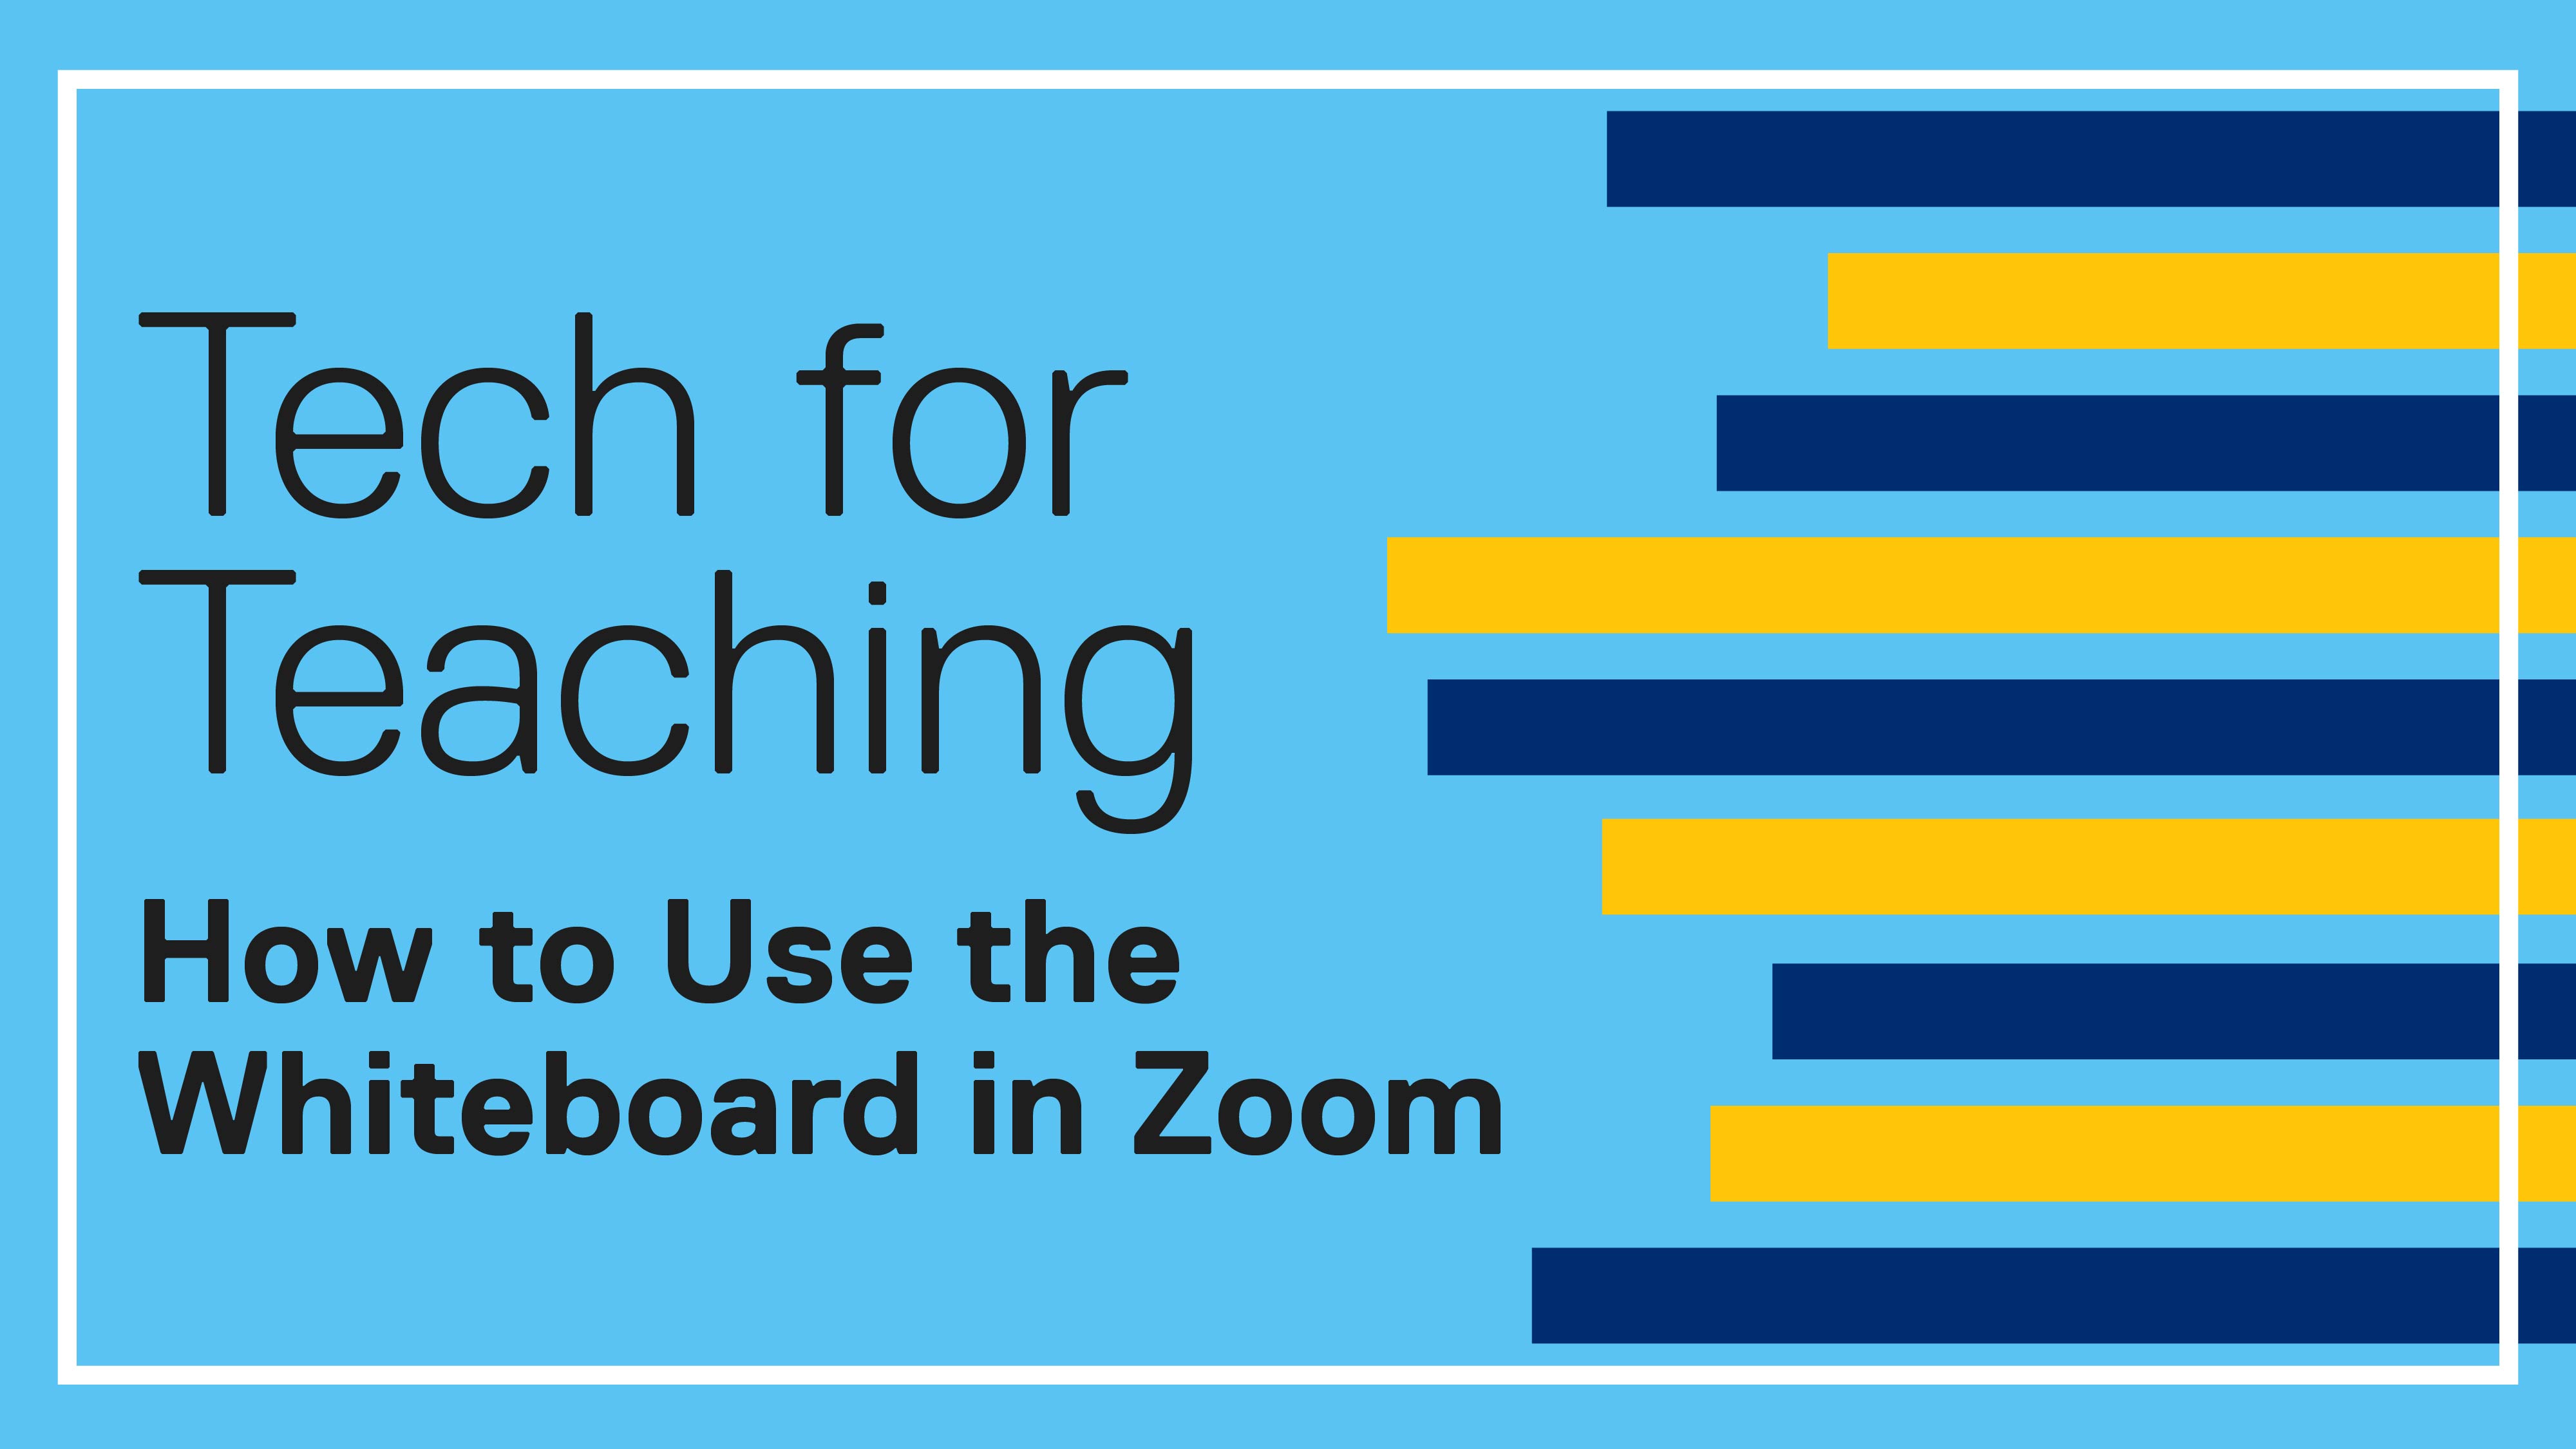 Tech for Teaching: How to Use the Whiteboard in Zoom